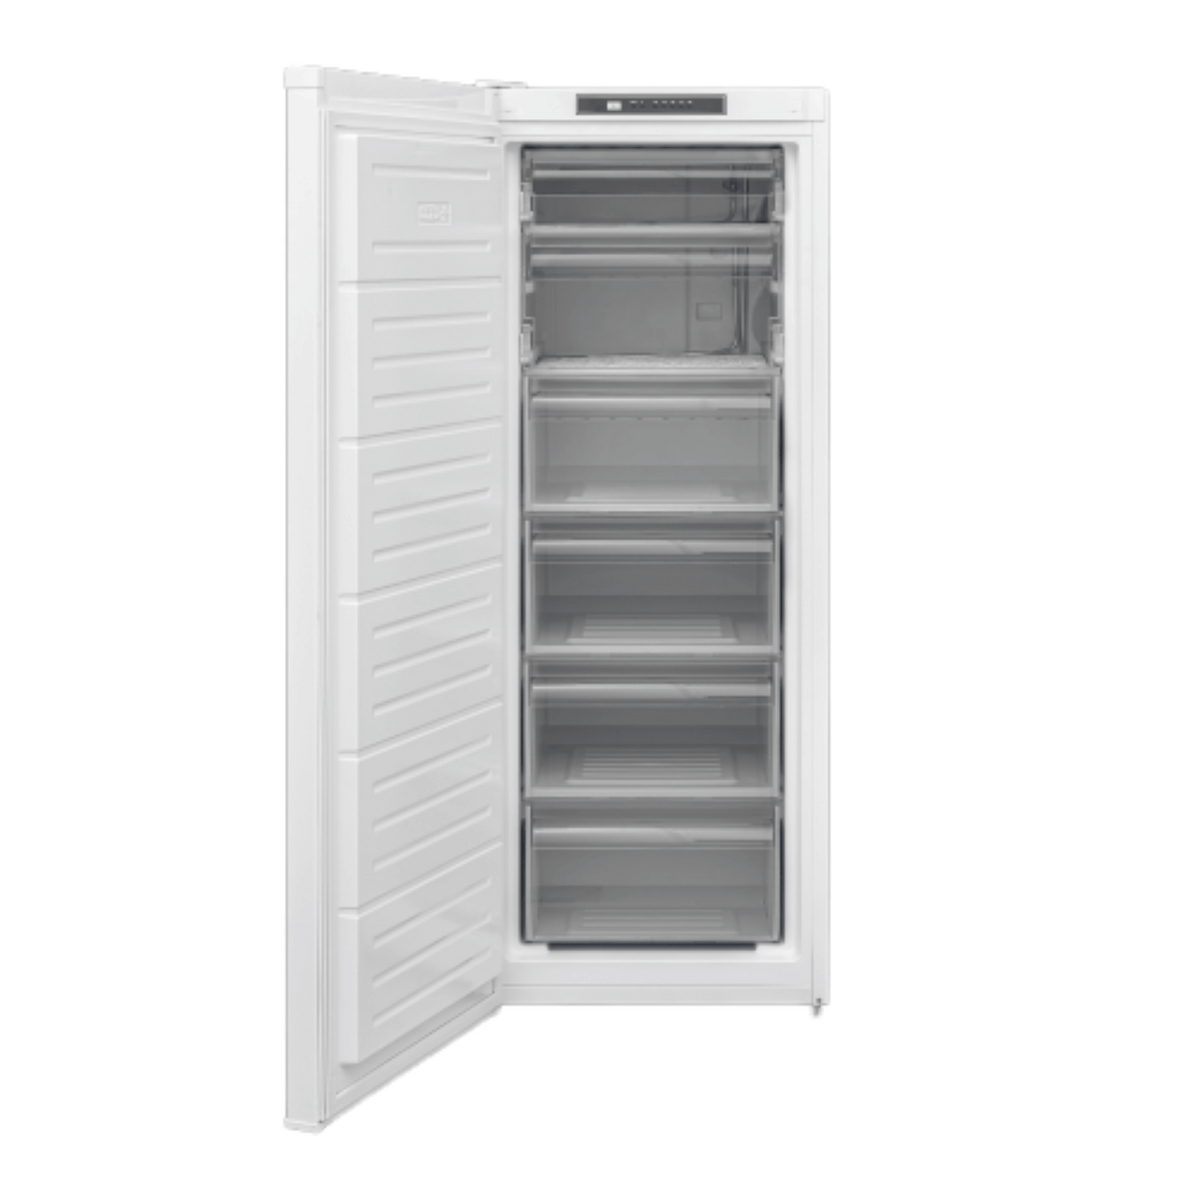 NordMende 188L Freestanding Tall Larder Freezer - White | RTF249WH from NordMende - DID Electrical